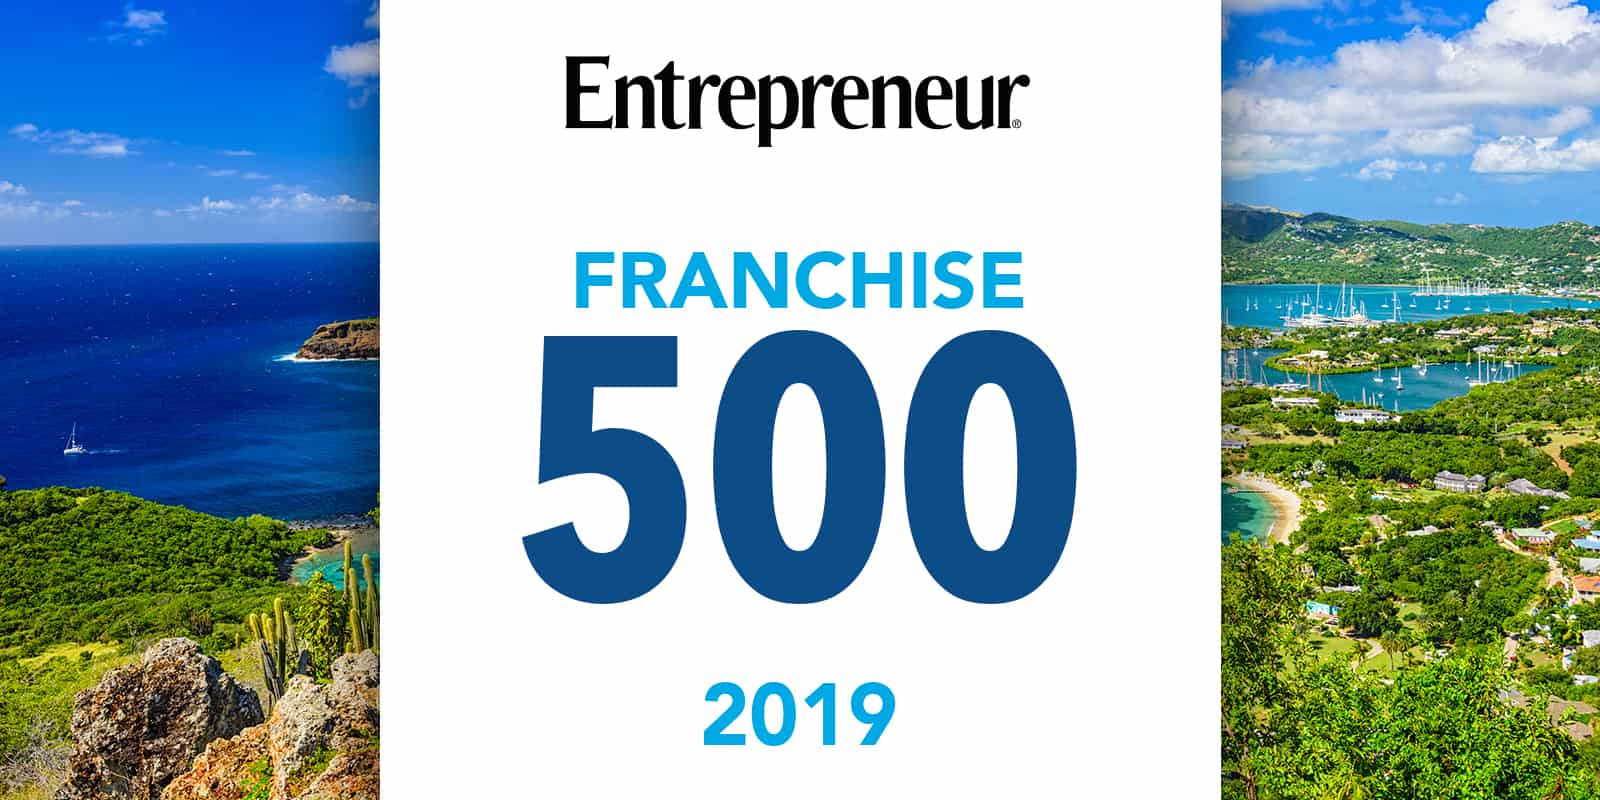 Entrepreneur 500® ranks Dream Vacations as 101 for its outstanding performance in areas like unit growth, financial strength and stability, and brand power.